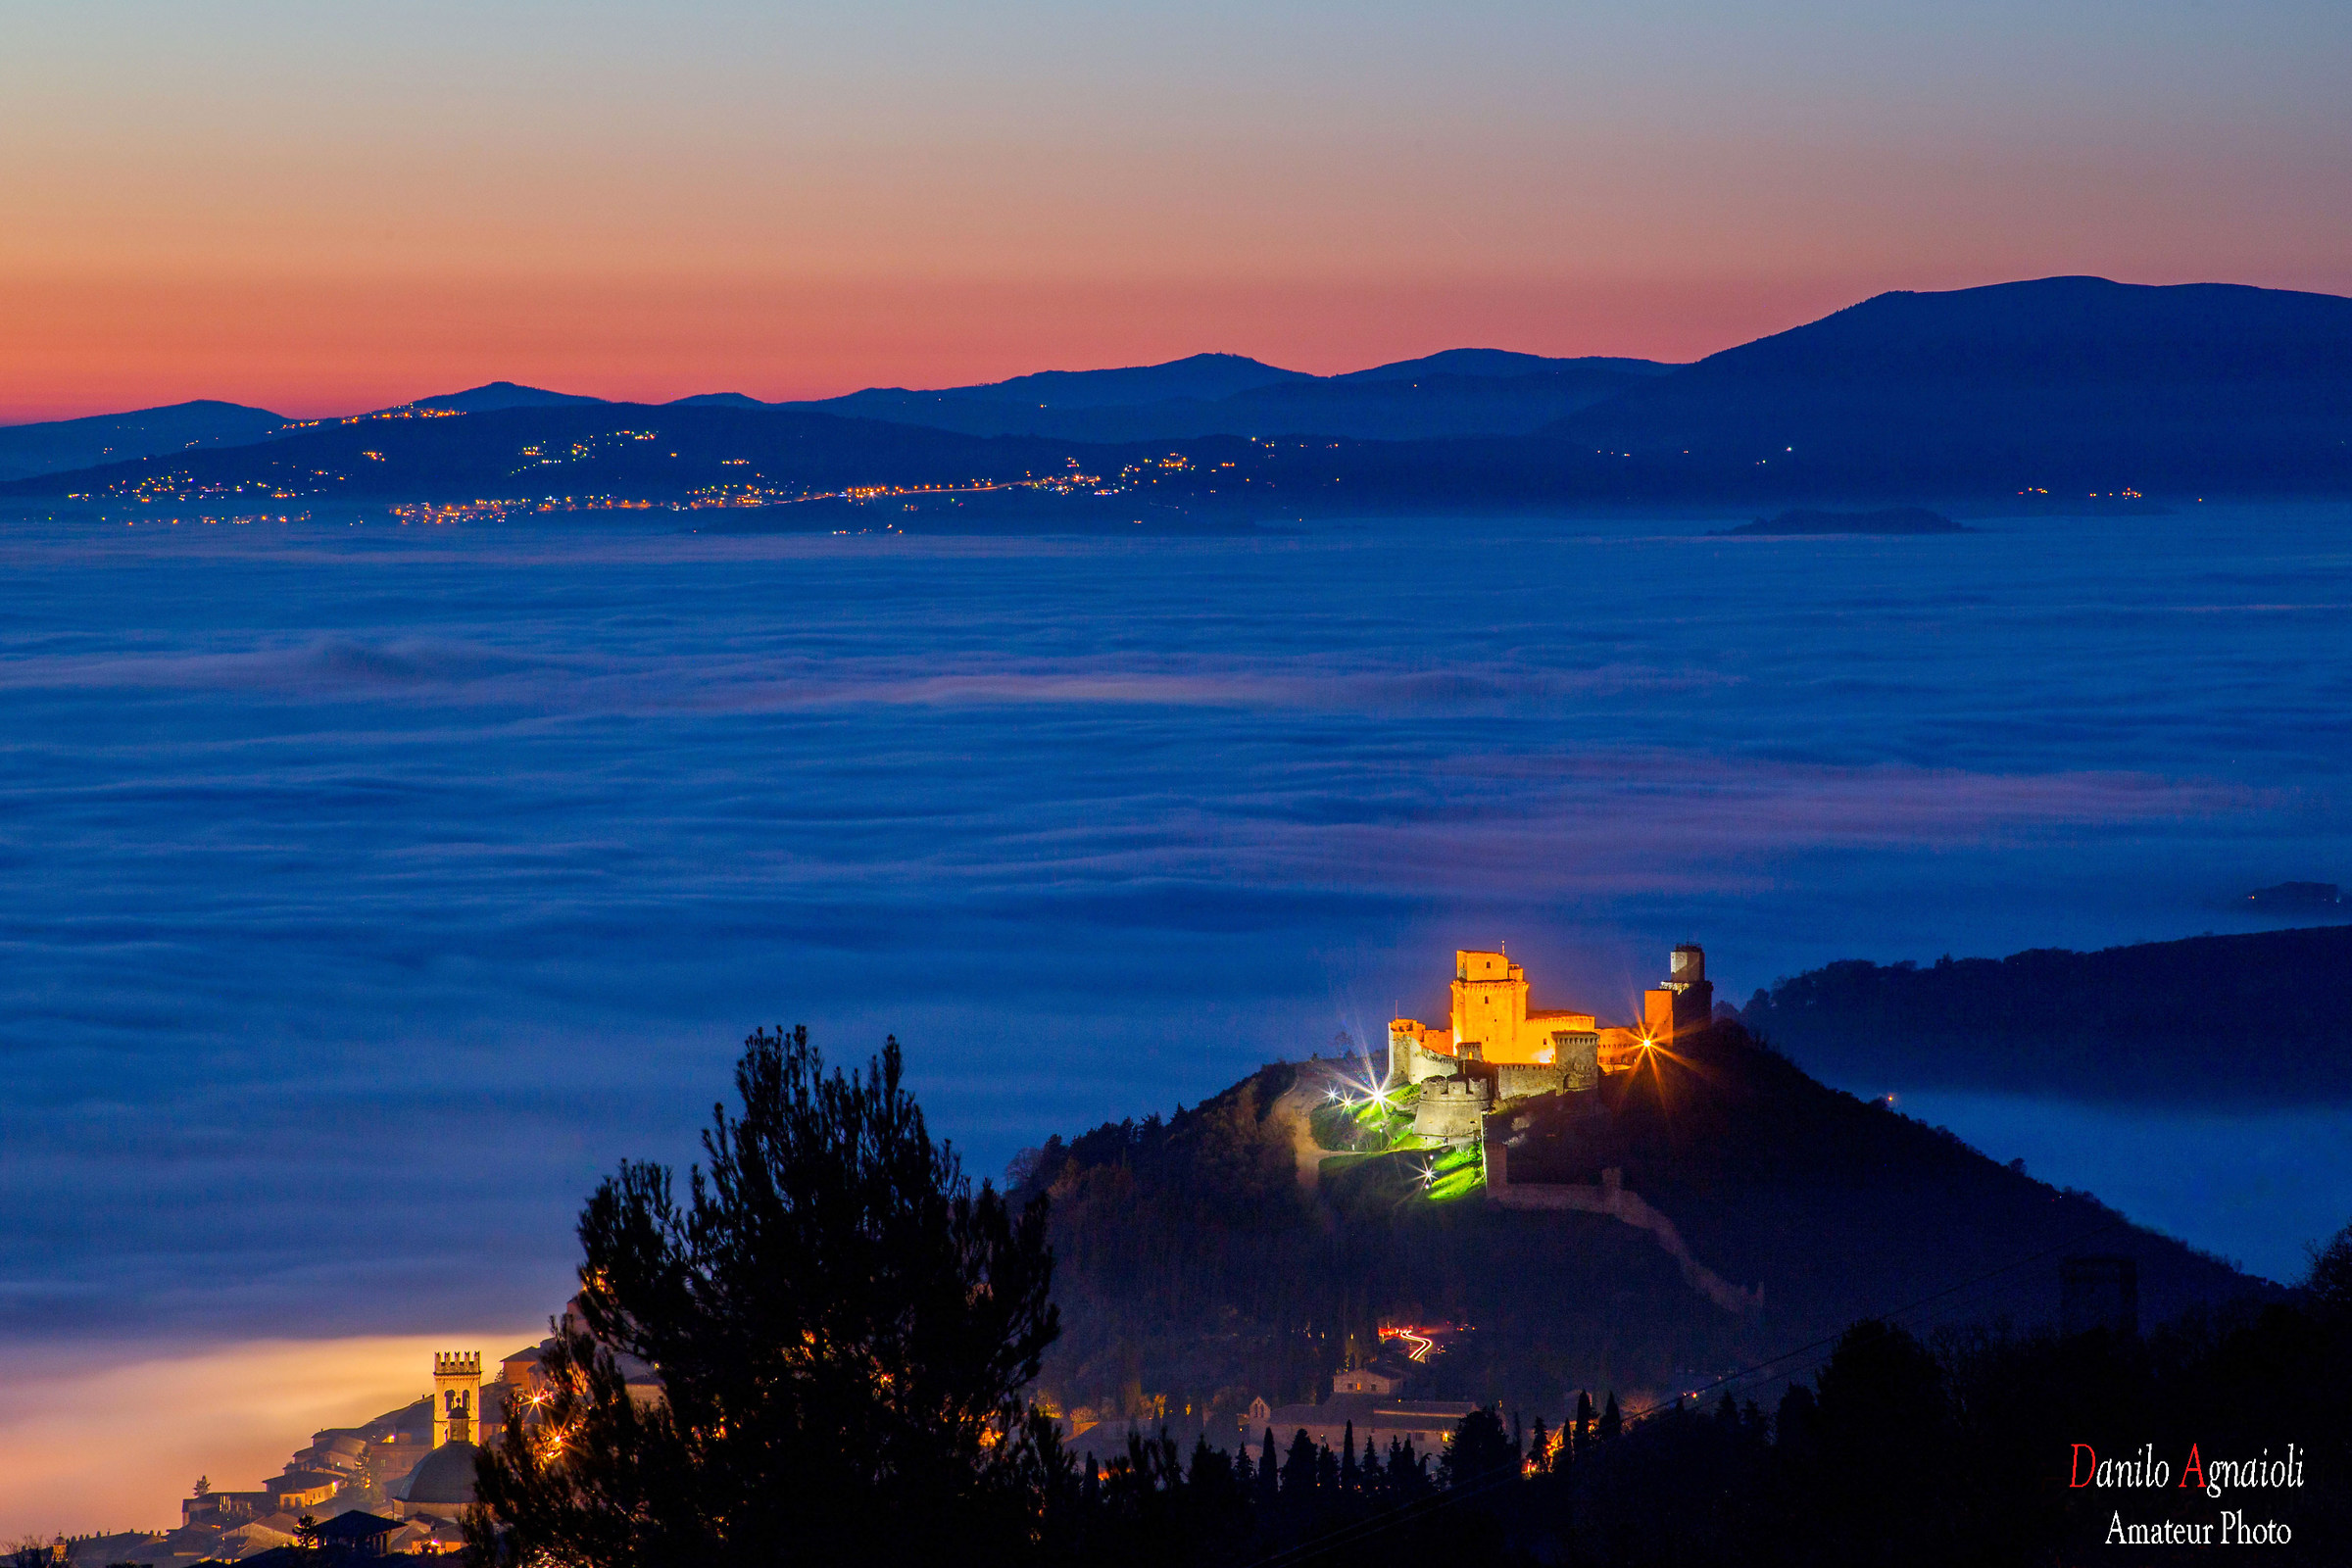 The Rock of Assisi, and everything else in the fog...